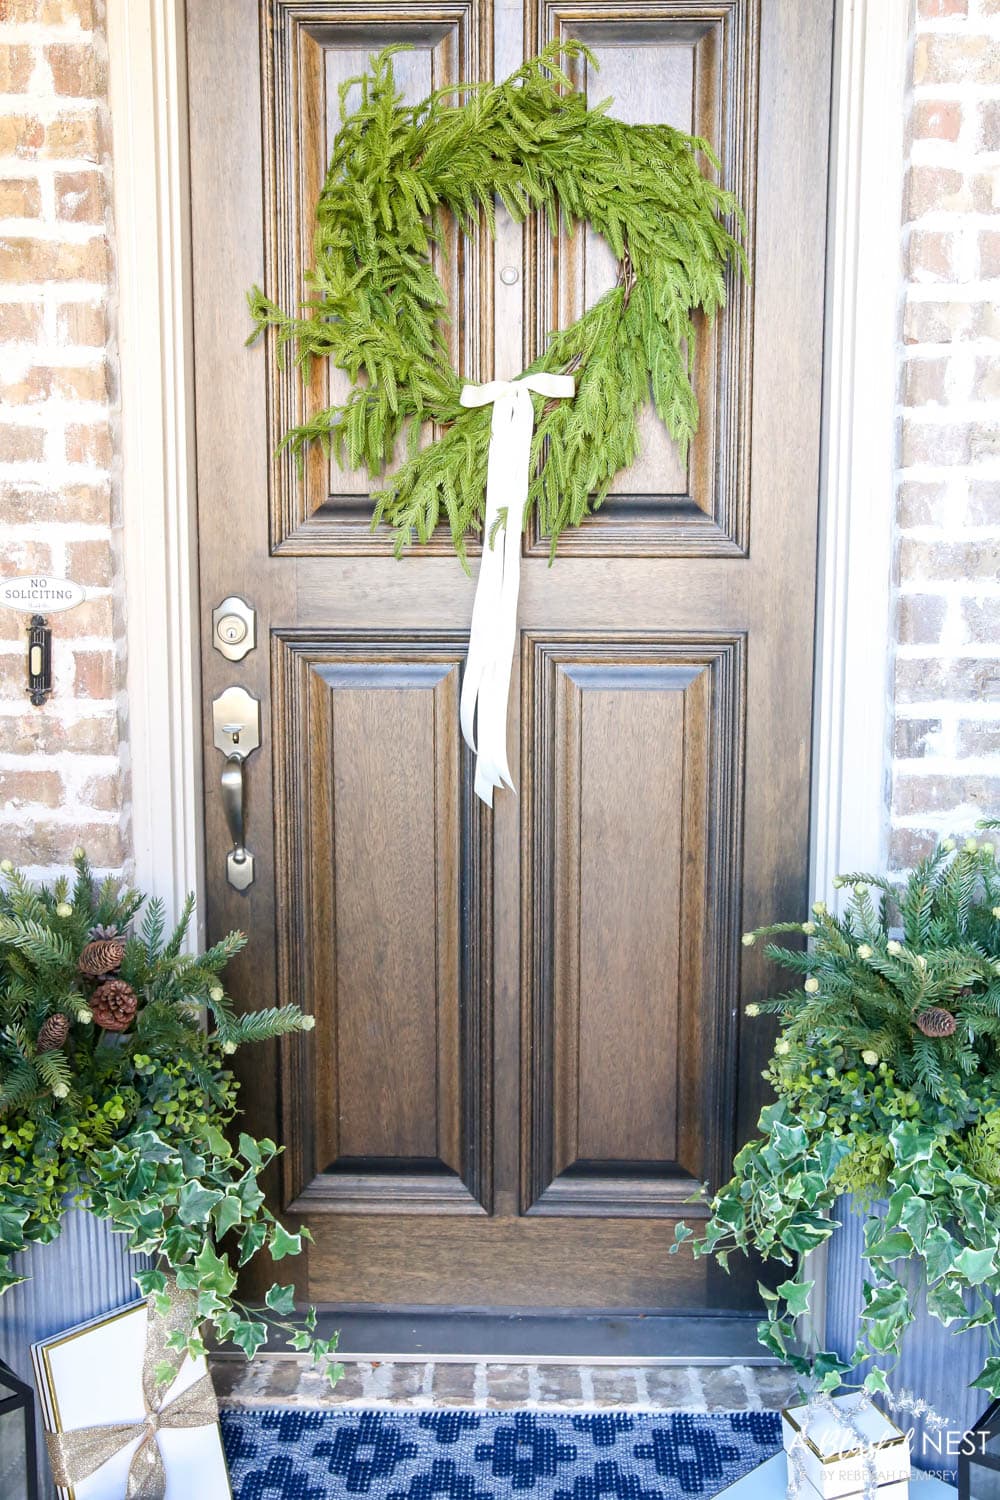 Brick entryway with solid wood door, pine wreath with a white satin ribbon, blue and white doormat with planters and black lanterns with gift boxes tucked next to them.